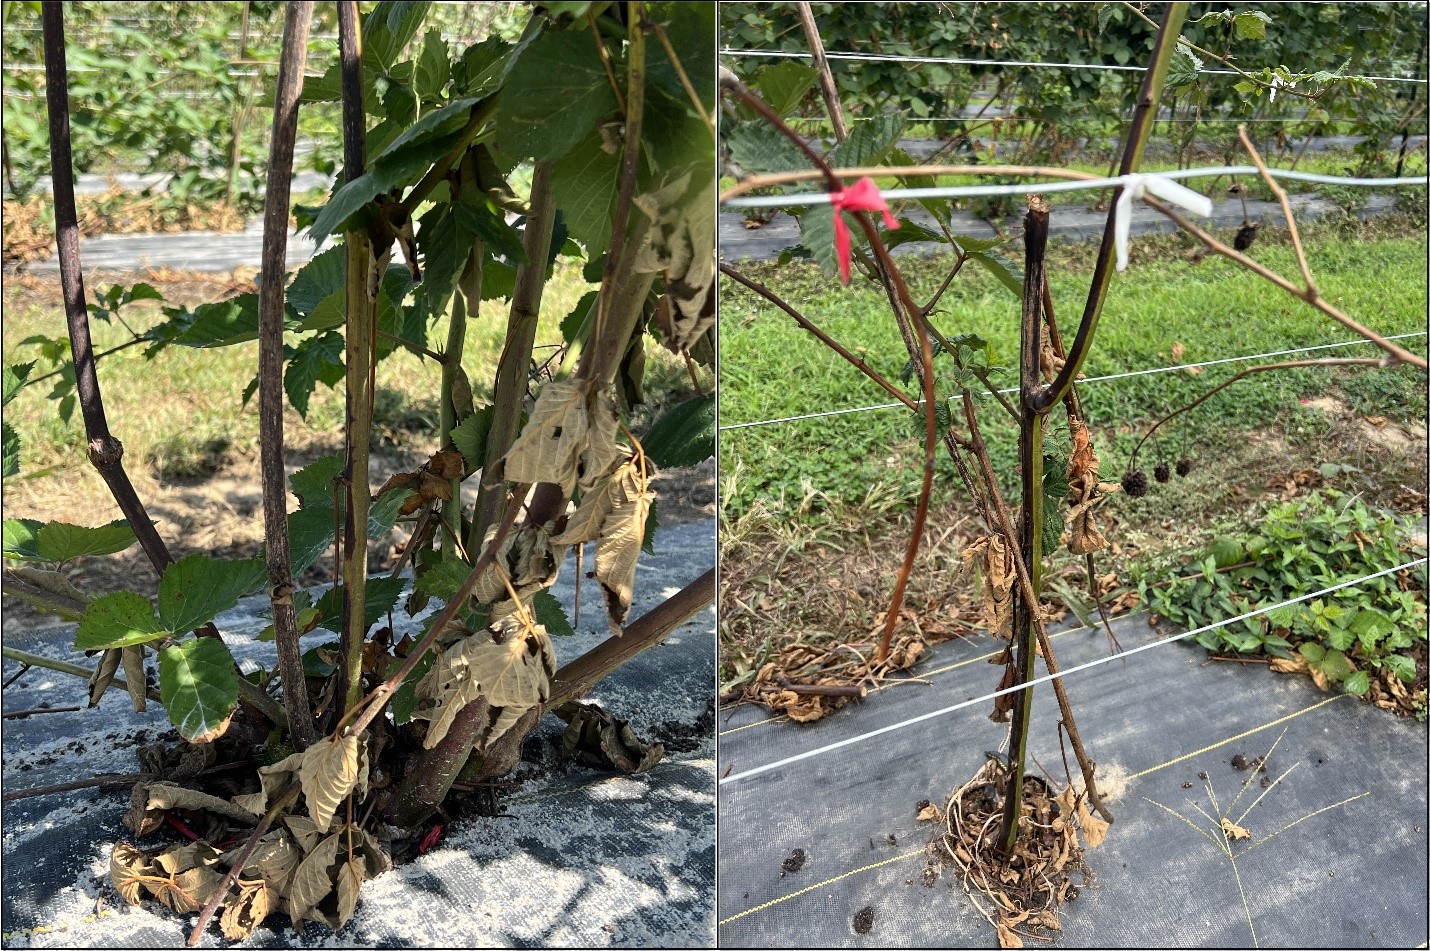 Picture 2. Fusarium wilt pictured on blackberry plants in Arkansas. Necrotic lesions and discoloration can be seen predominantly on one side of canes. Spore masses can also be seen as tan/pink areas on necrotic areas in each plant pictured here.